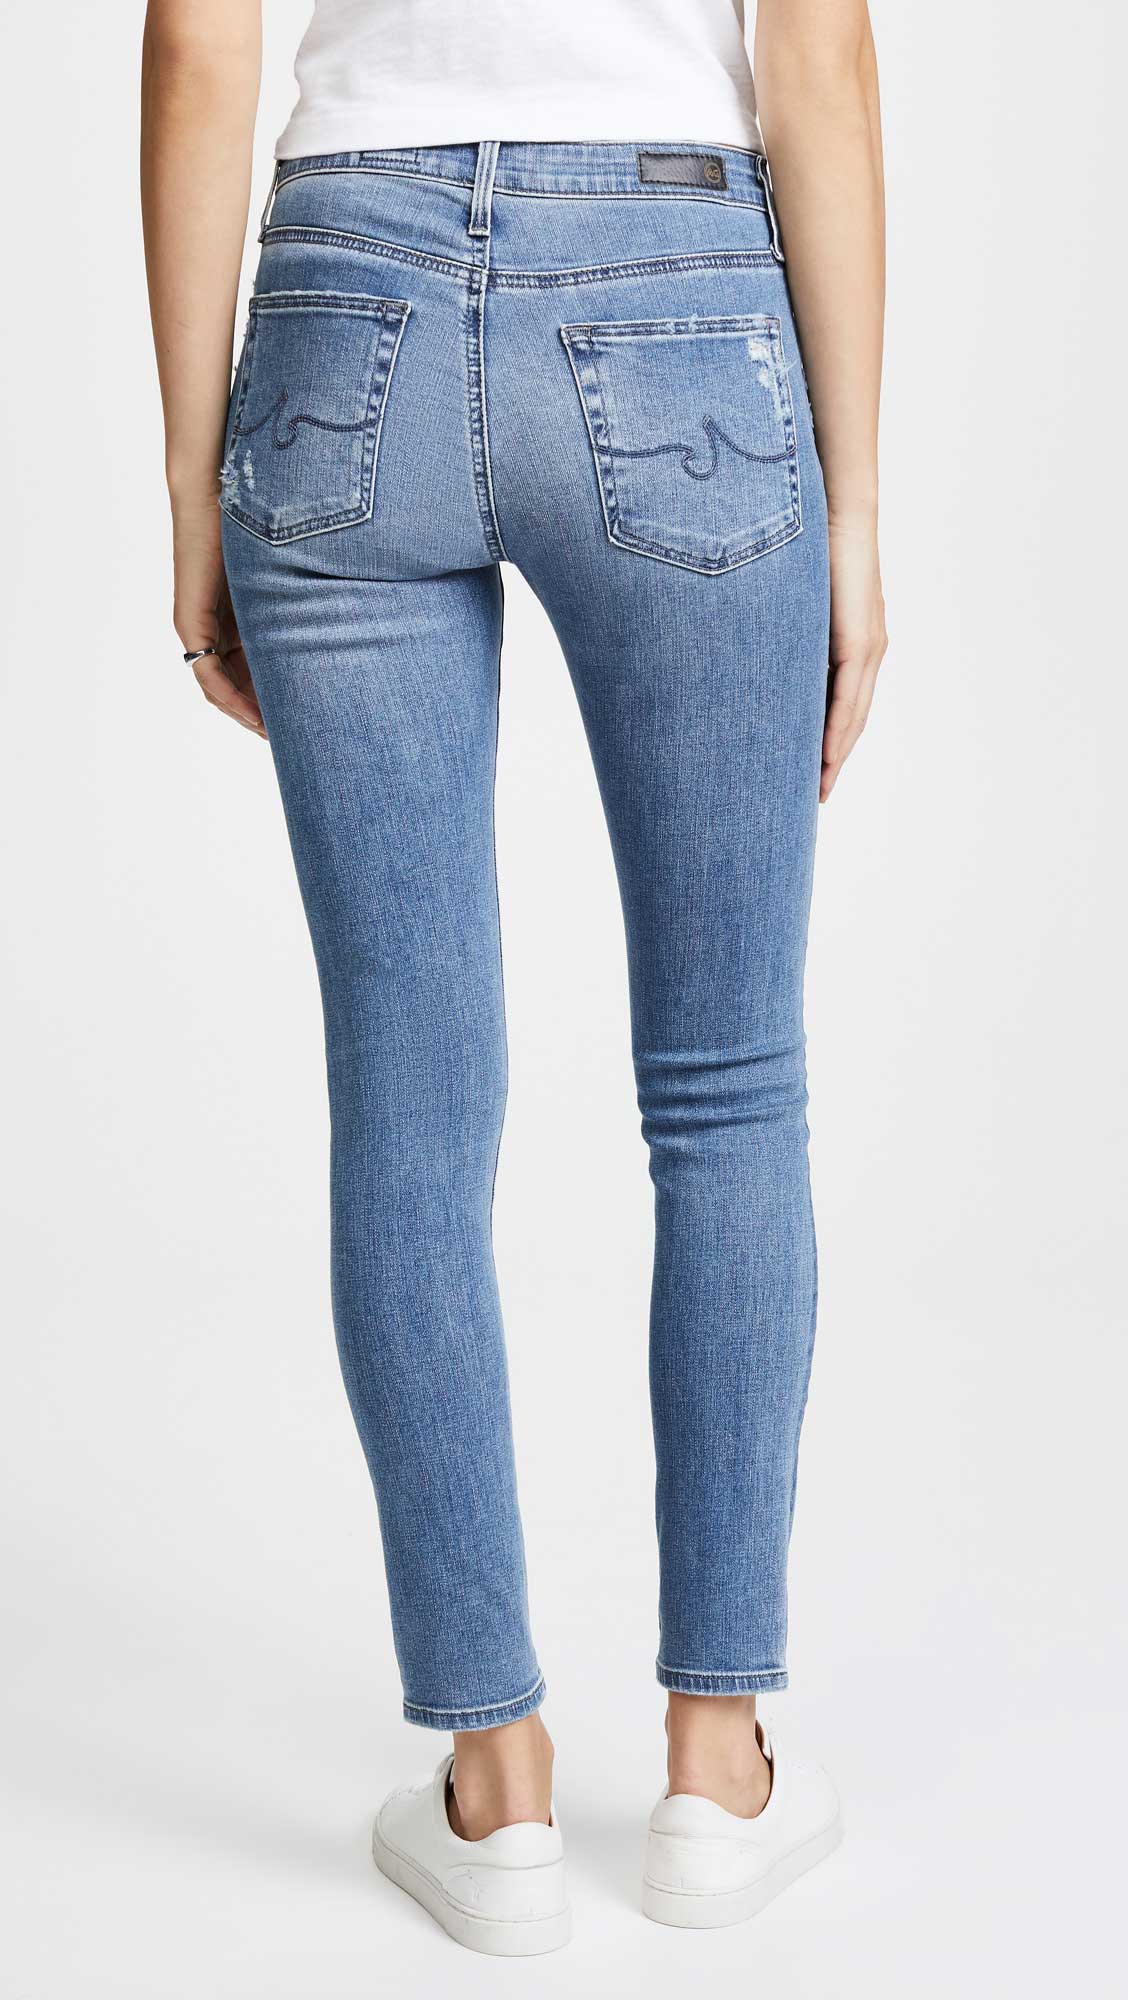 Find Of The Week: AG The Farrah Ankle Skinny Jeans - THE JEANS BLOG